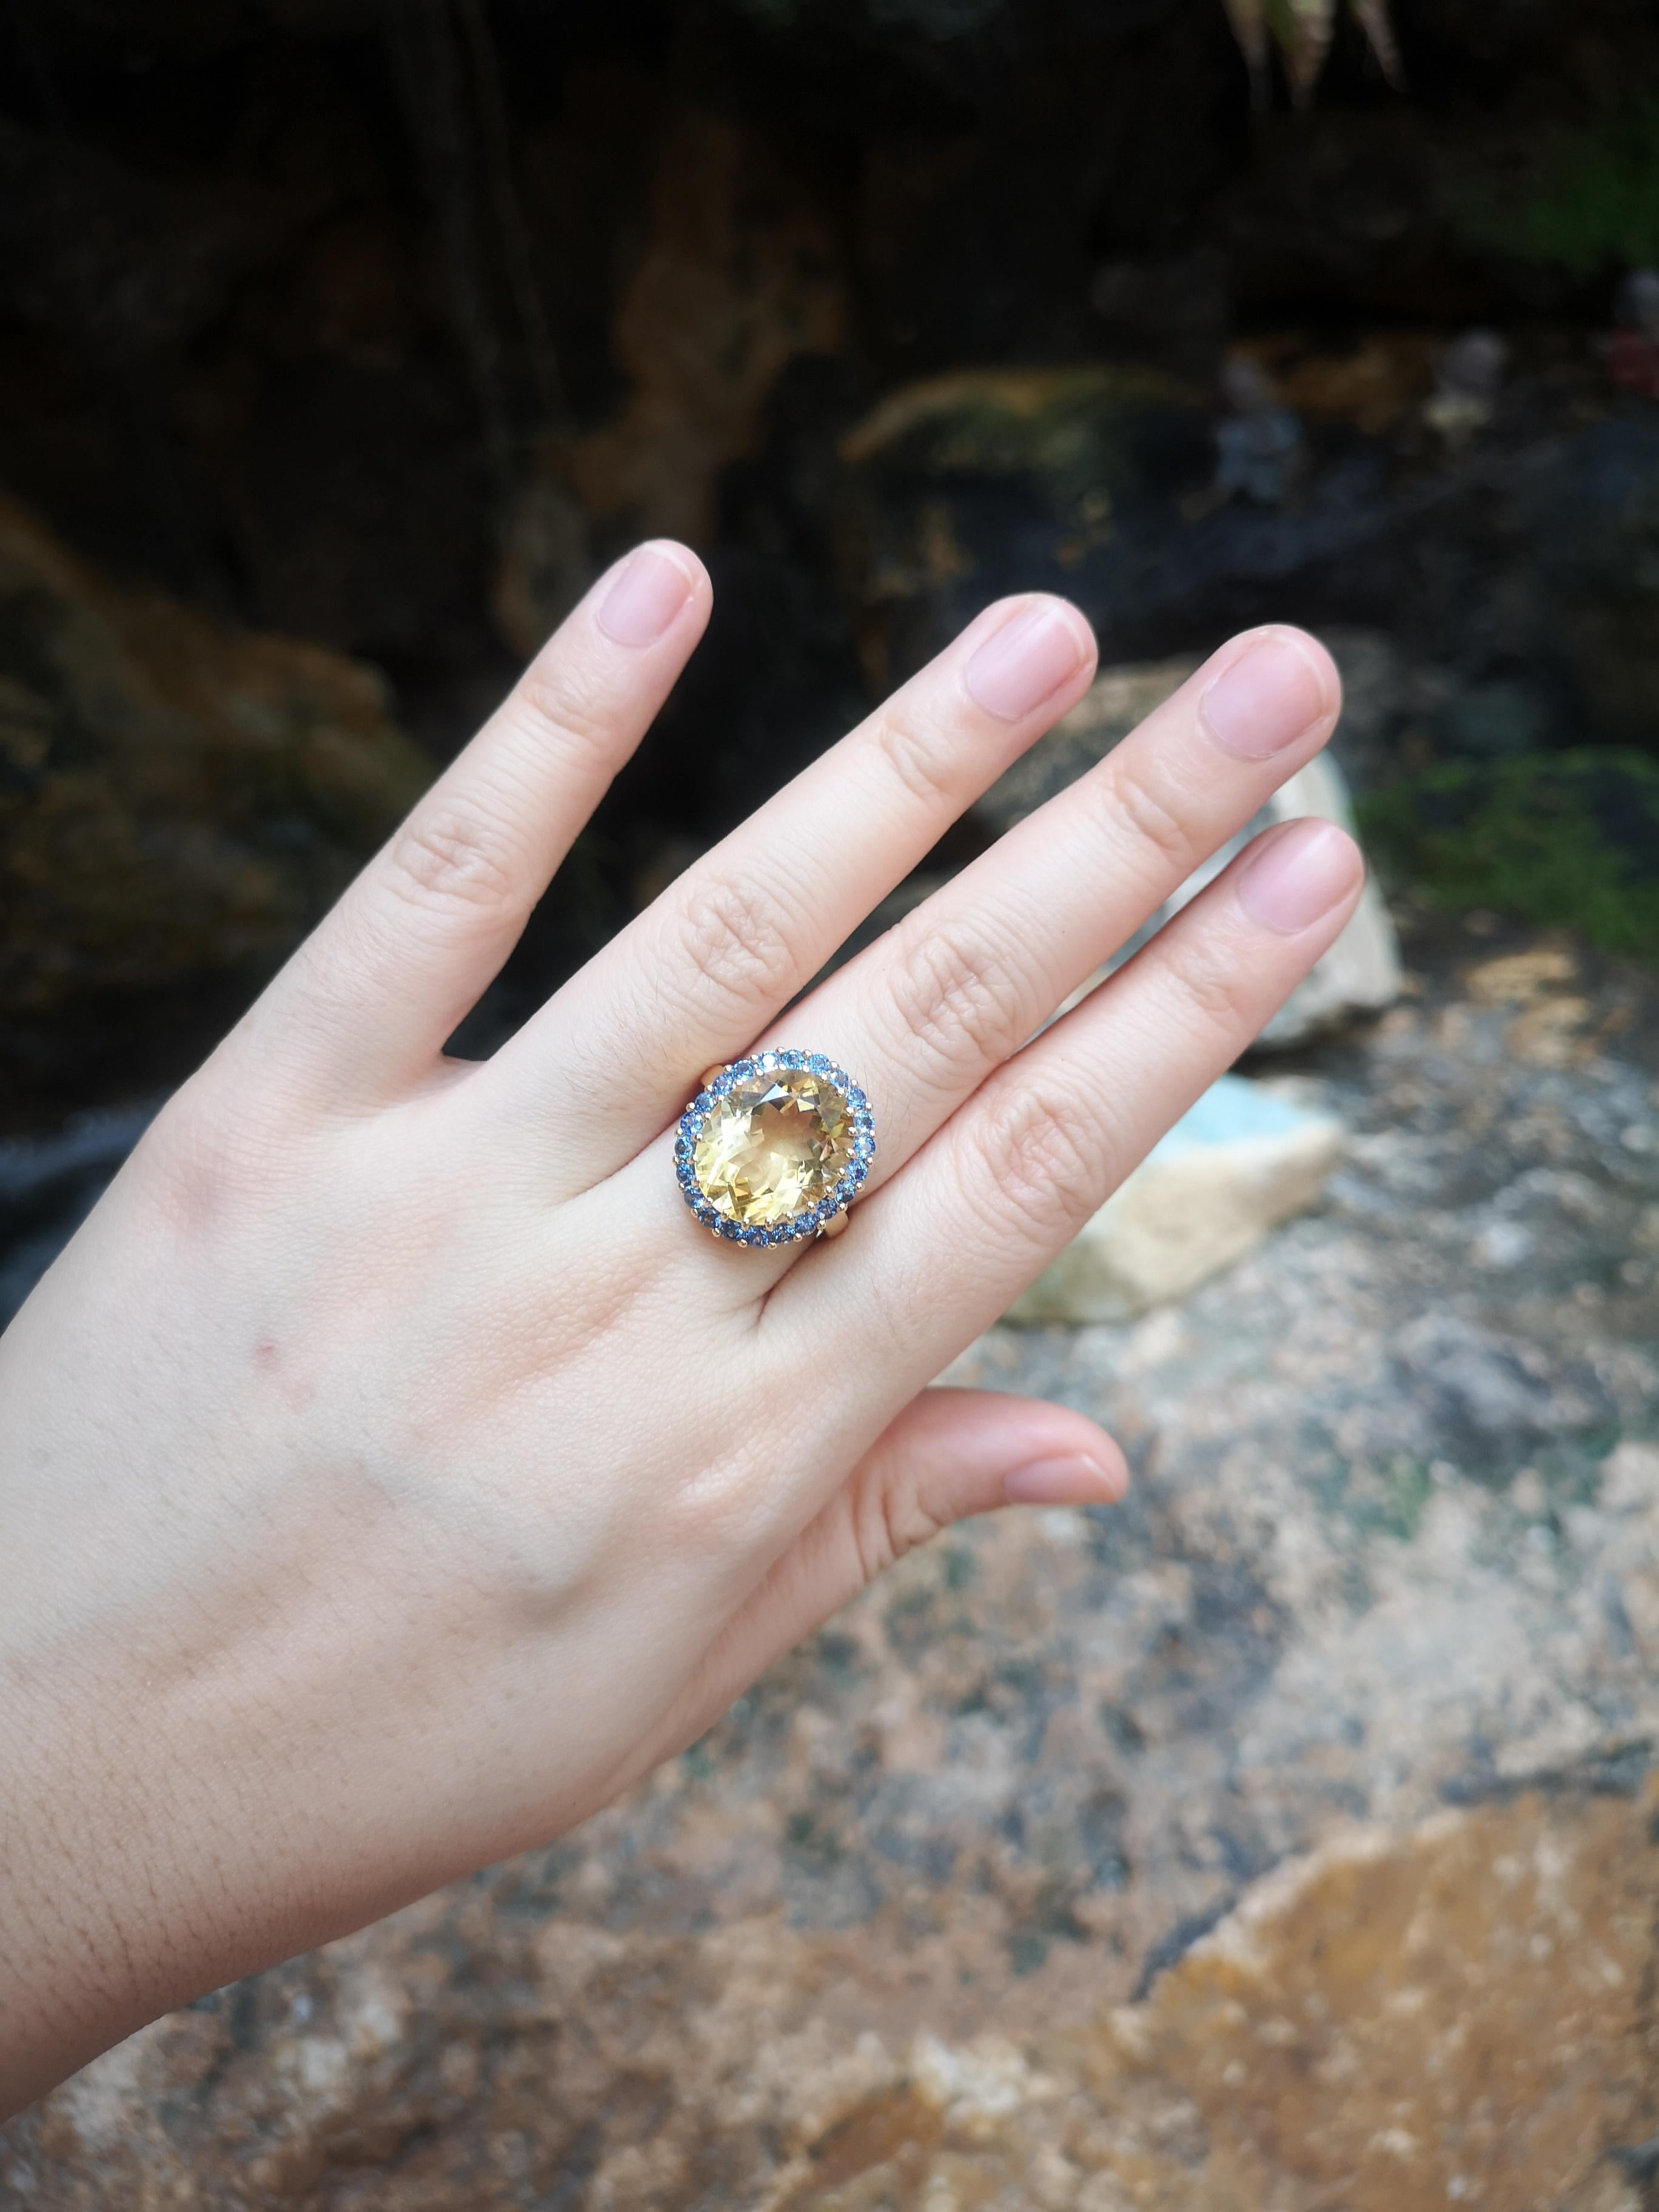 Citrine 10.0 carats with Blue Sapphire 1.50 carats Ring set in 18 Karat Gold Settings

Width:  1.8 cm 
Length: 2.0 cm
Ring Size: 57
Total Weight: 9.09 grams

